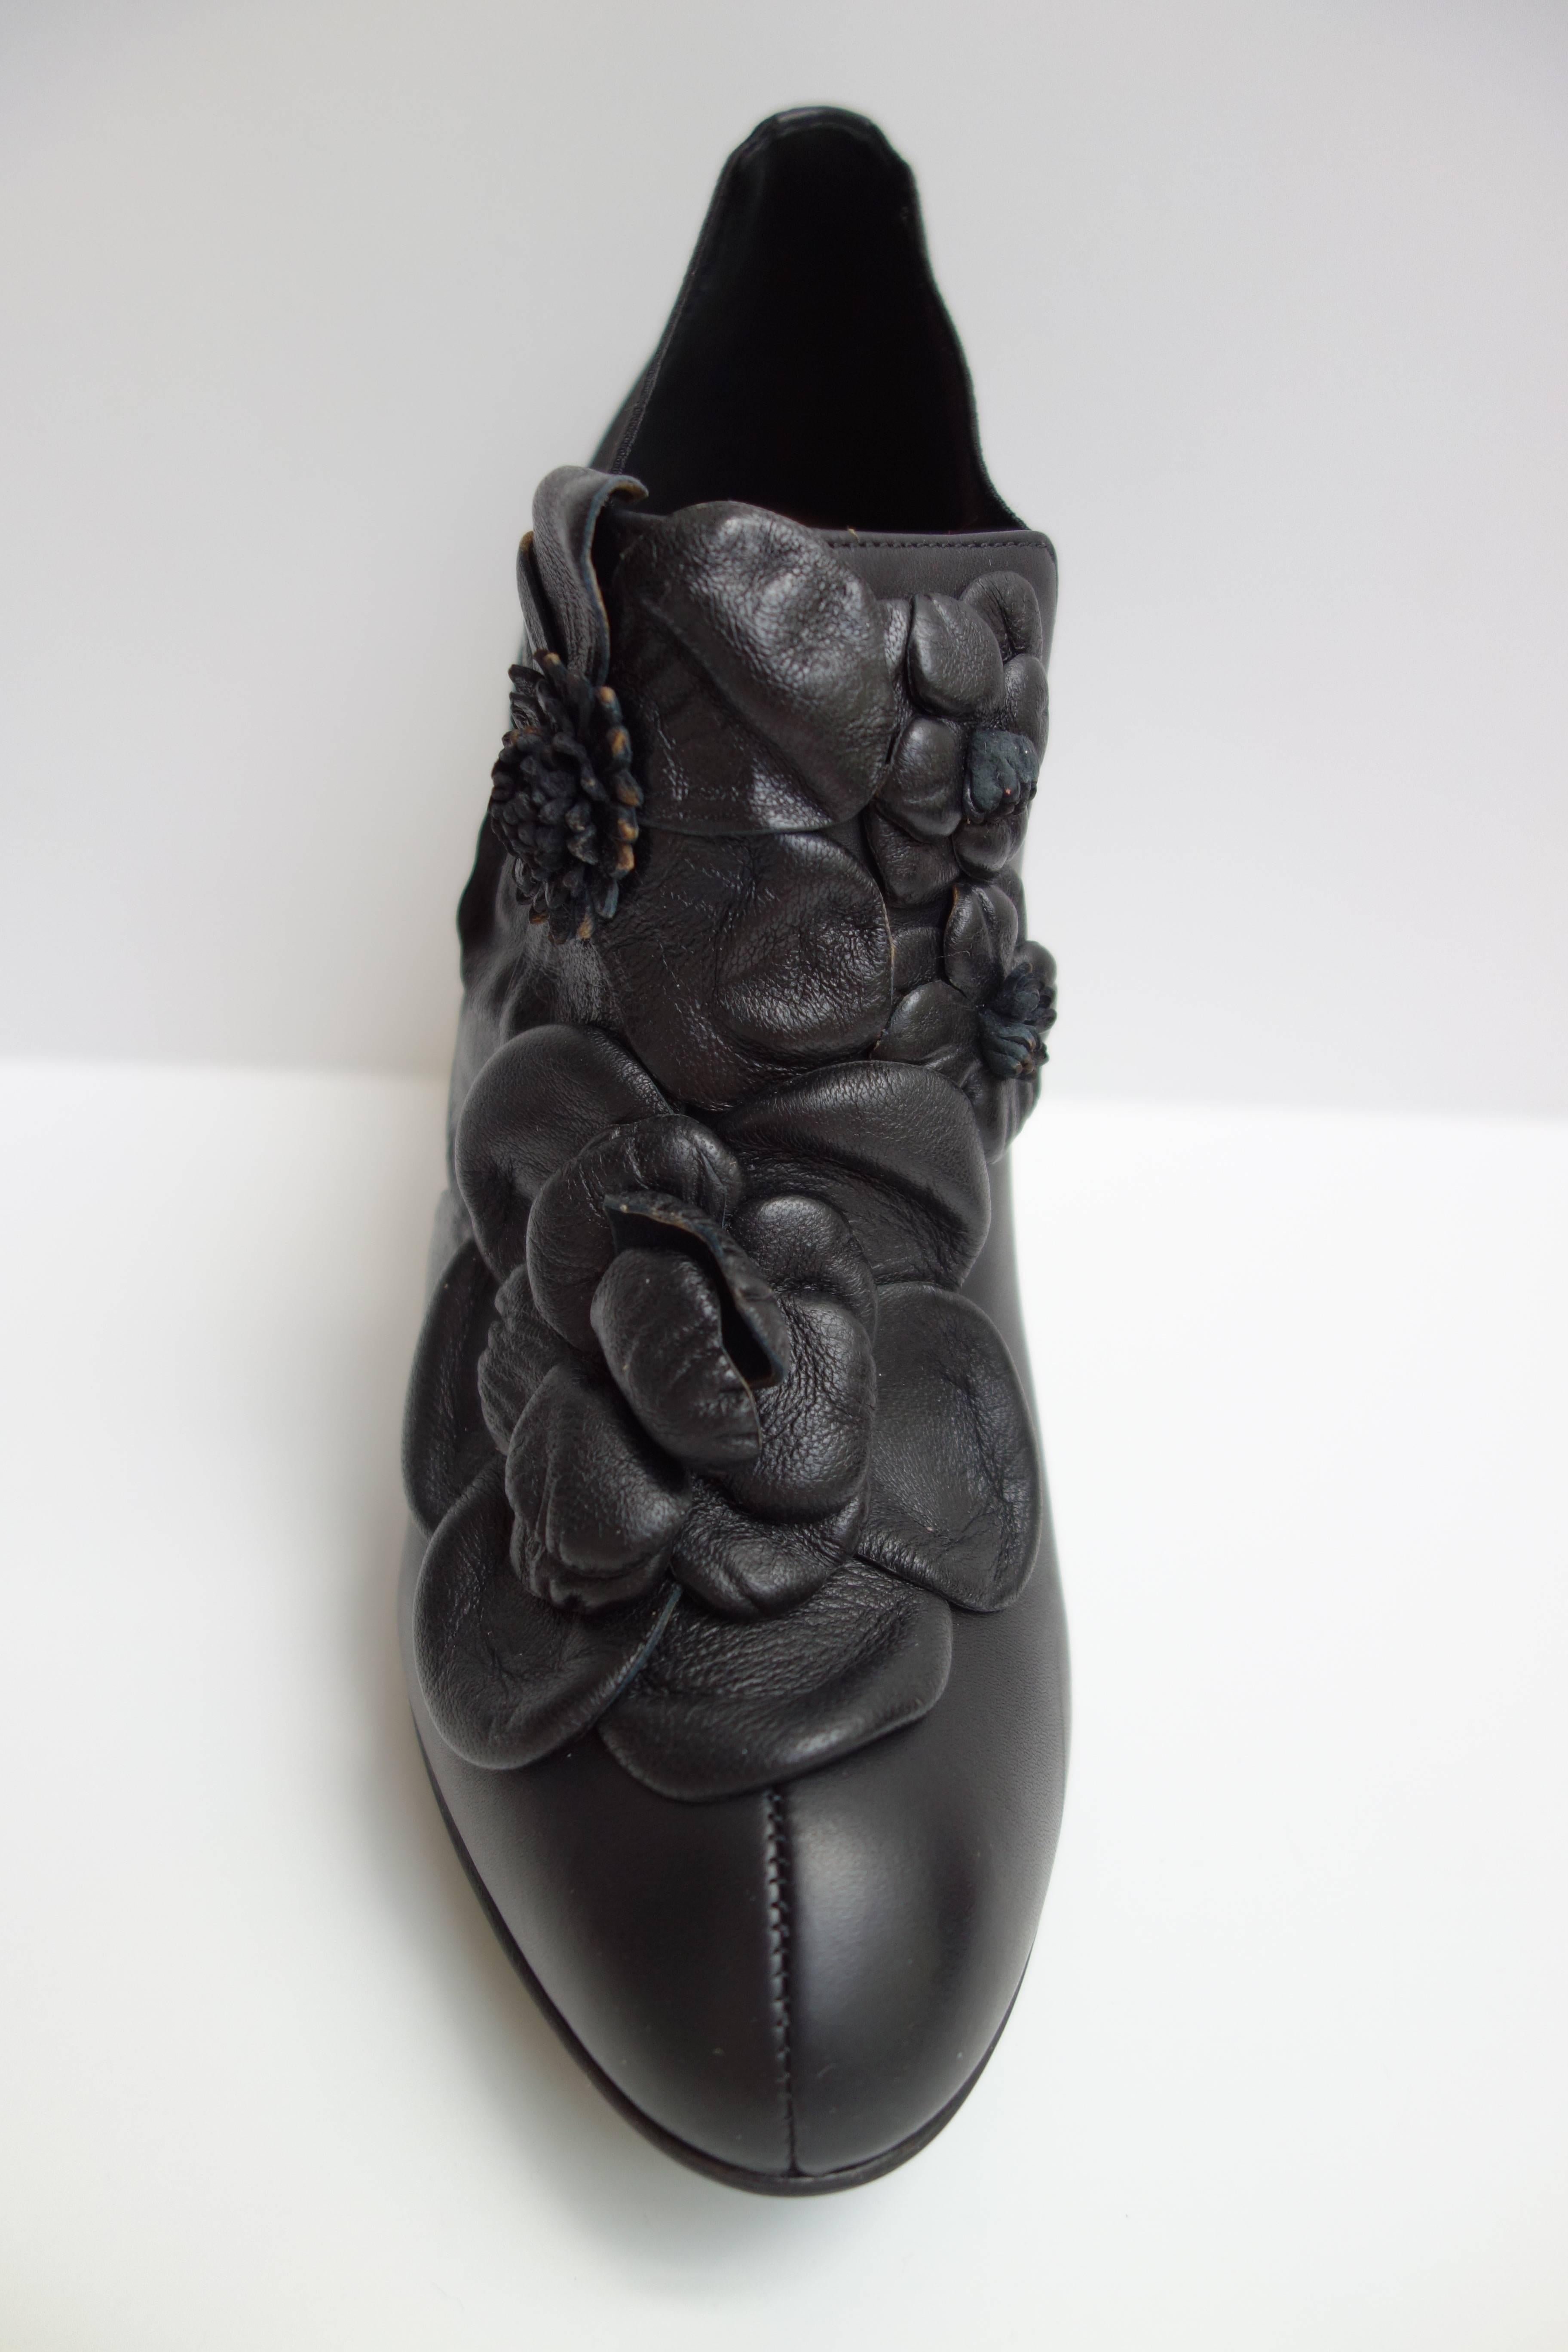 Black Valentino Techno Couture Floral Bootie Shoes New Size 39.5 For Sale